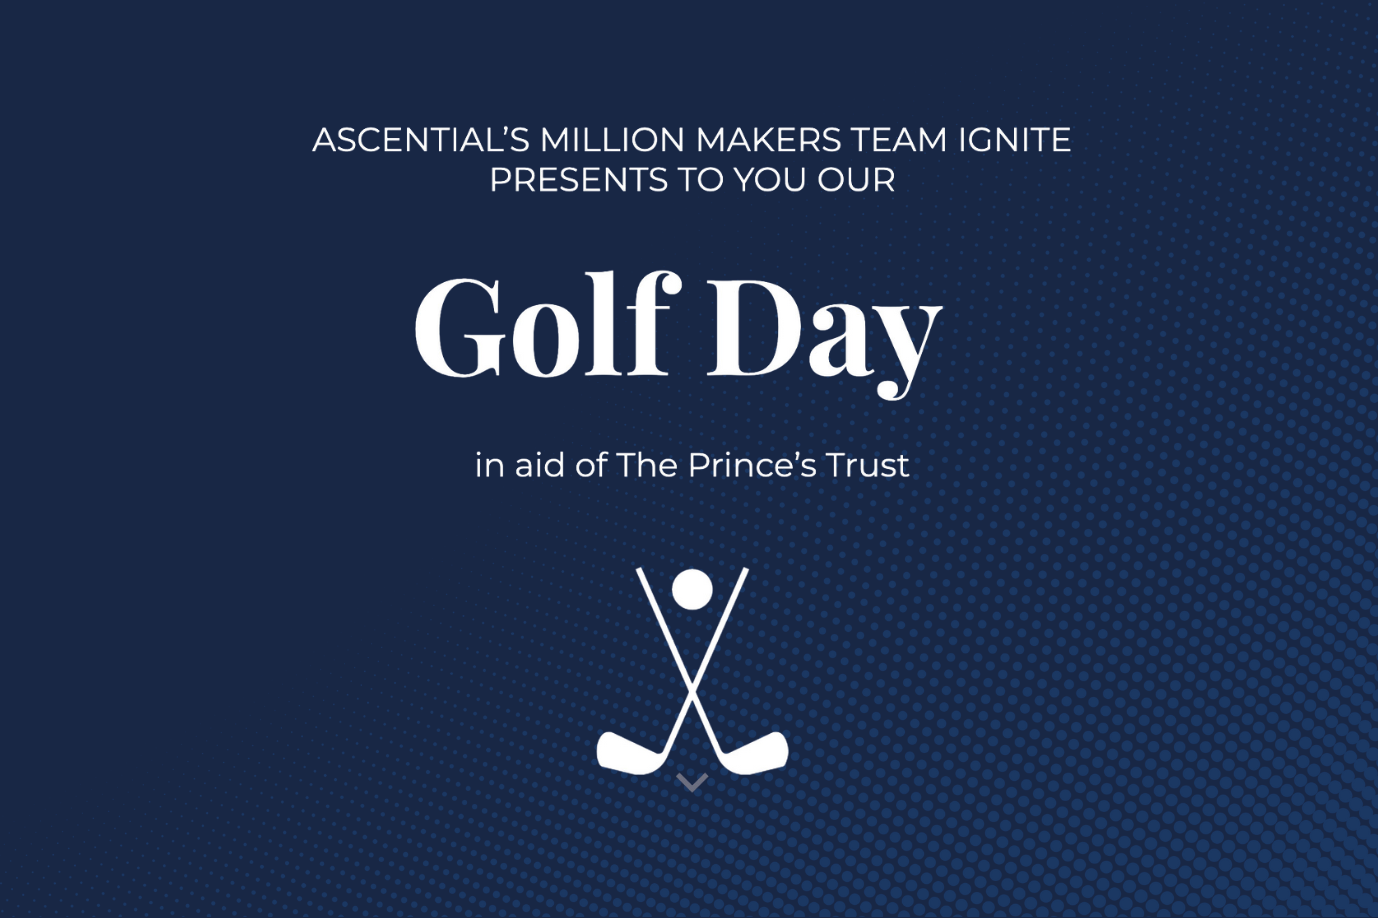 We’re supporting Ascential’s Golf Day